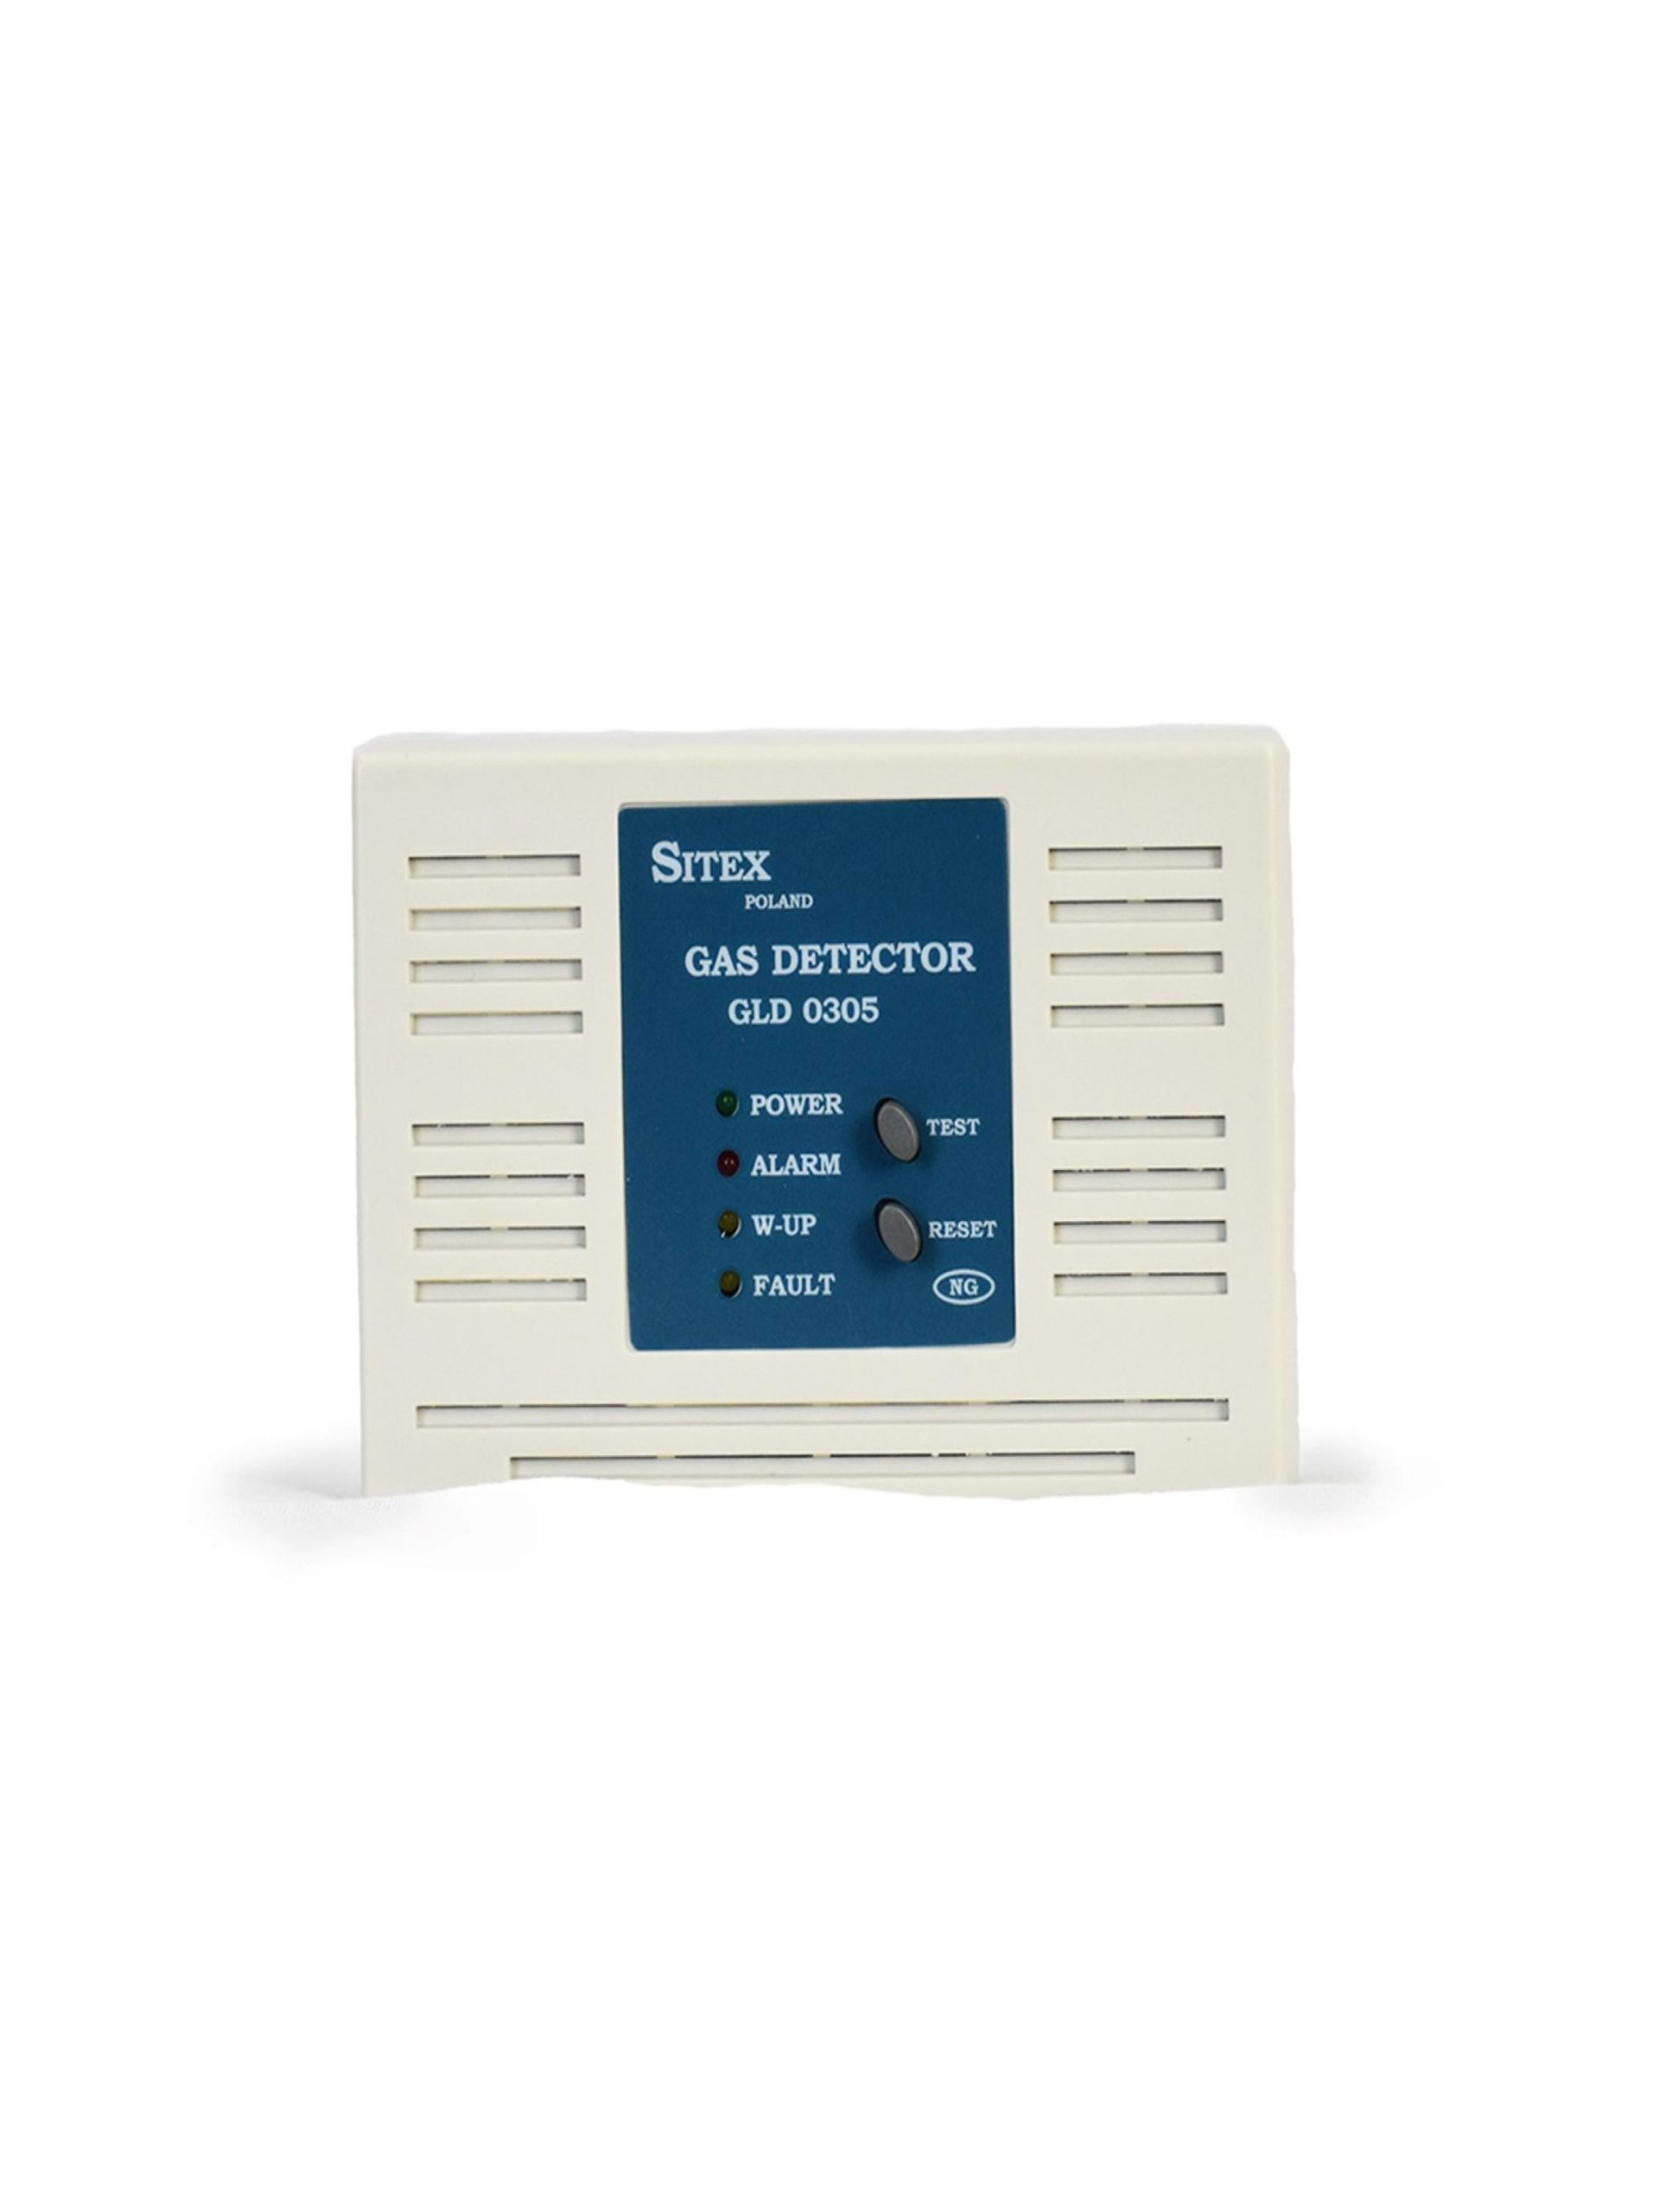 GAS DETECTOR SITEX FOR NATURAL GAS WITH TWO RELAYS